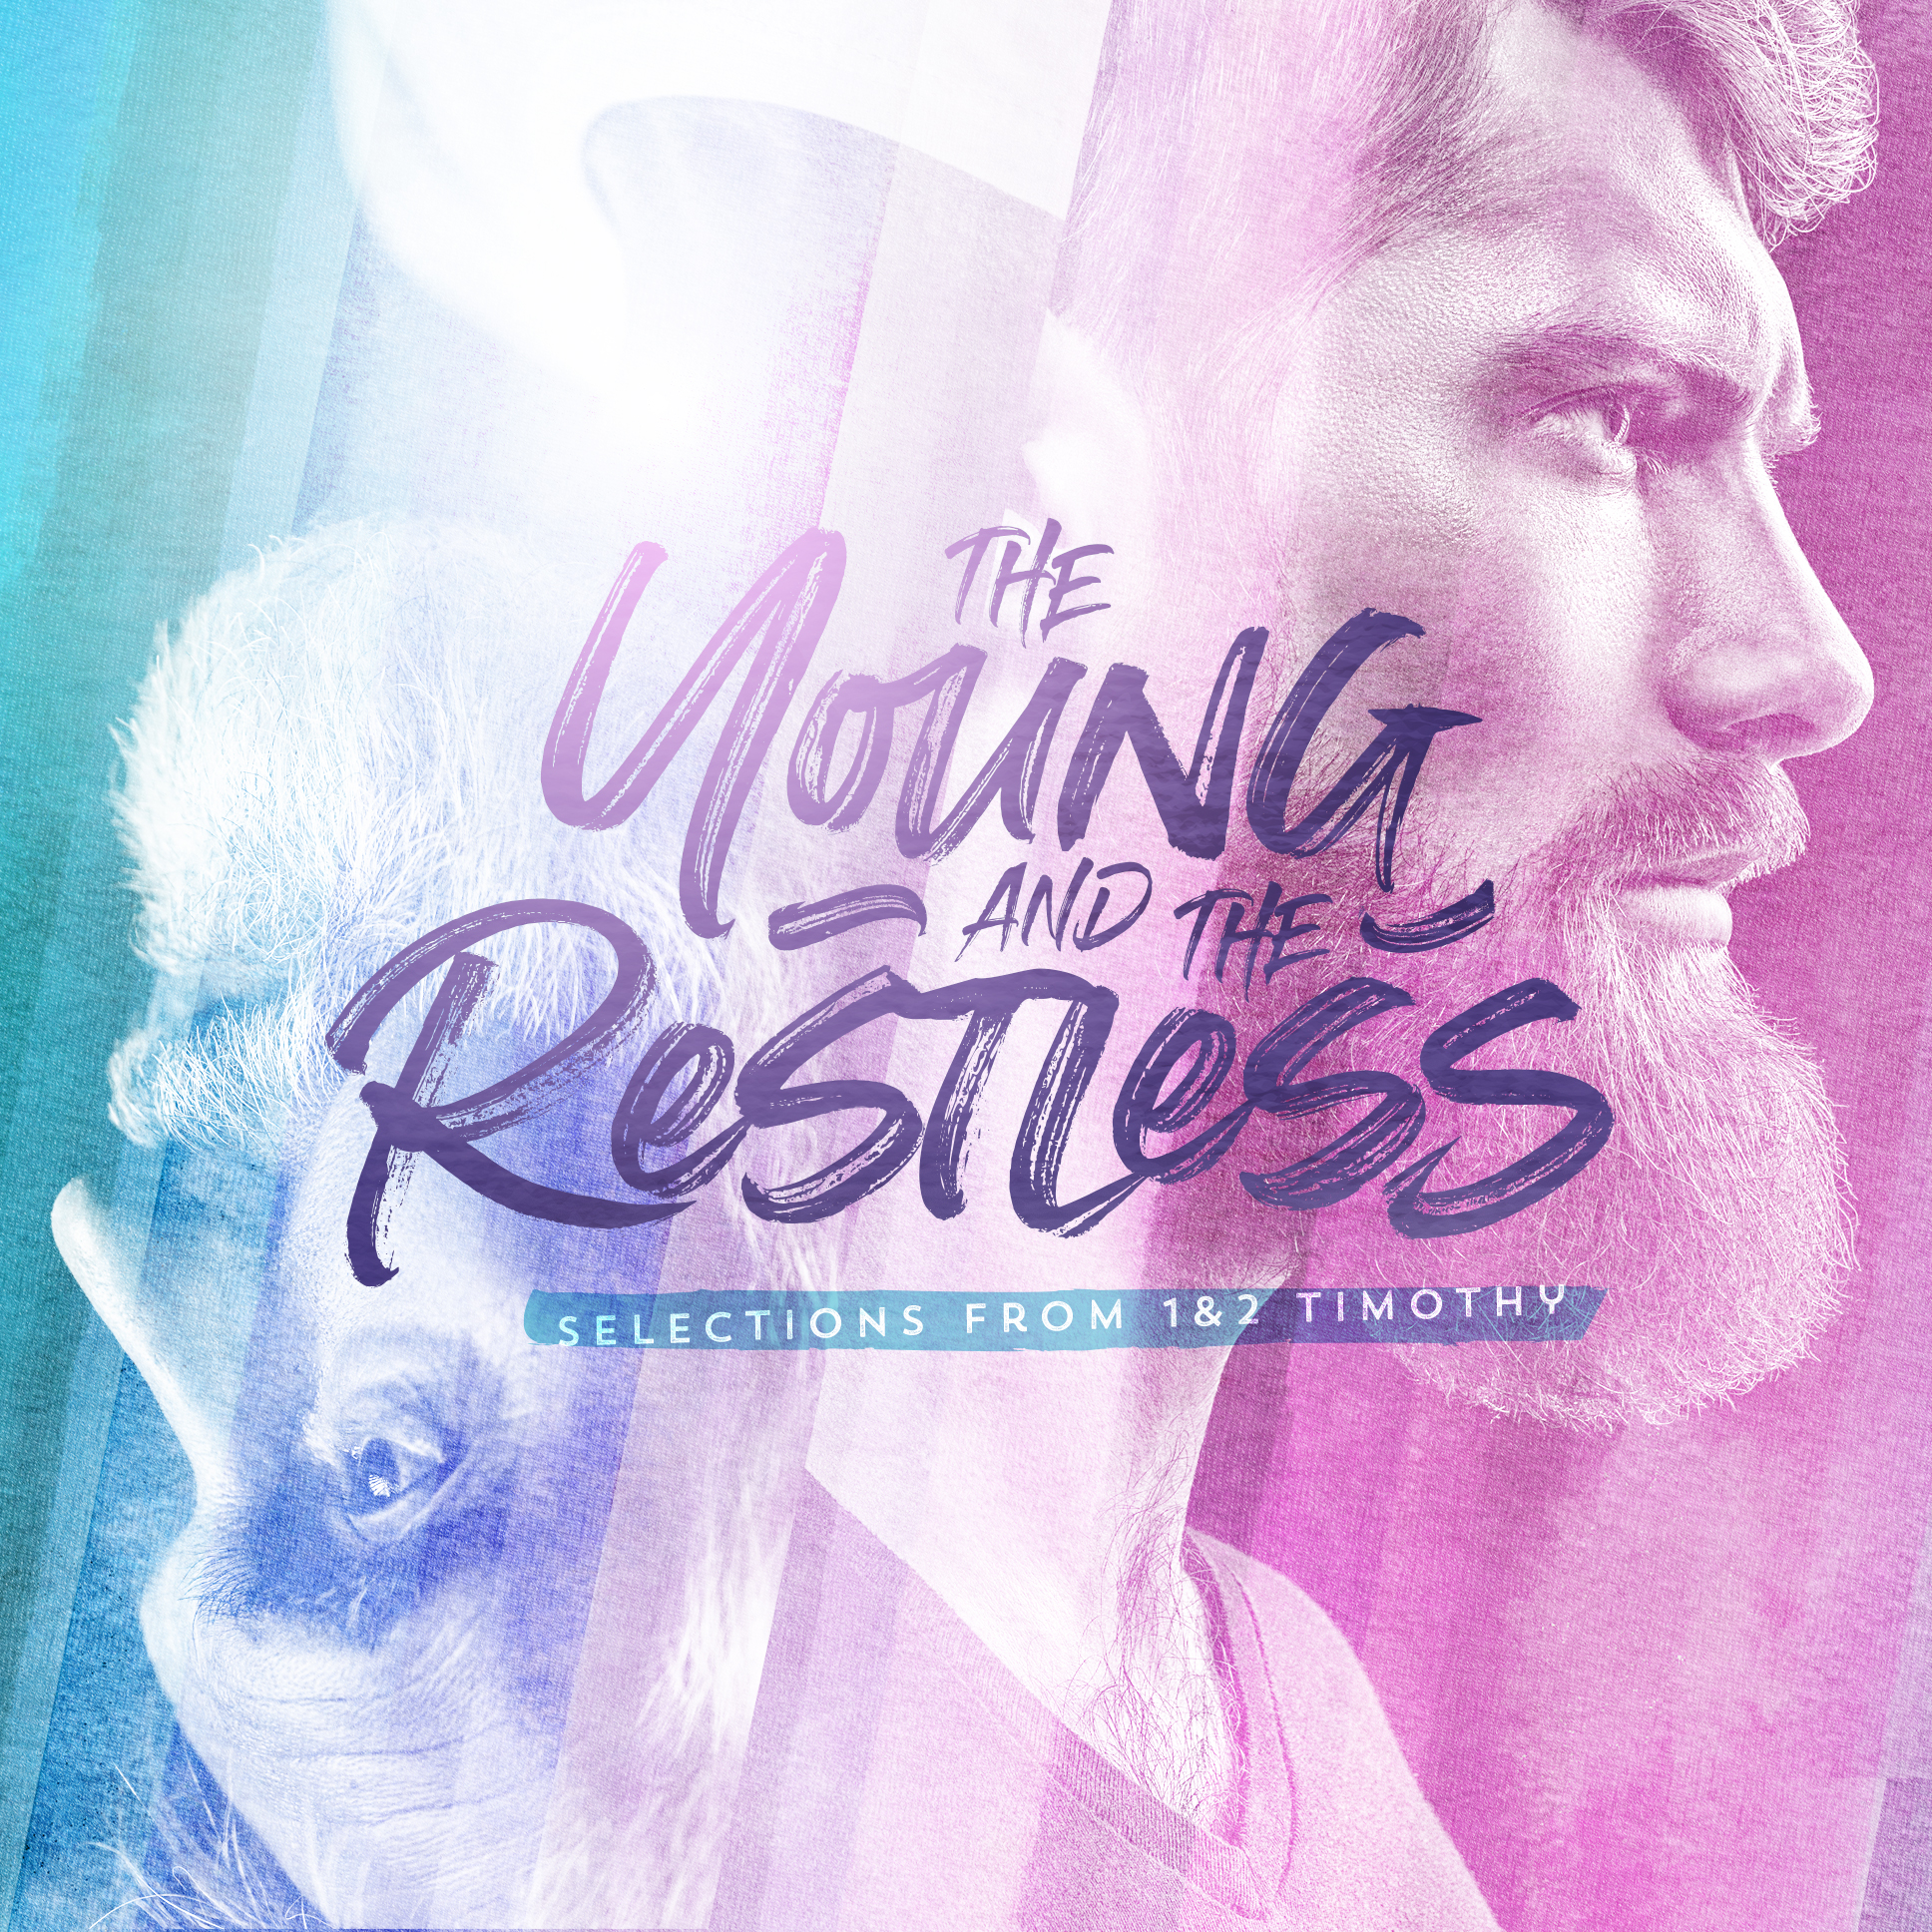 The Young & The Restless